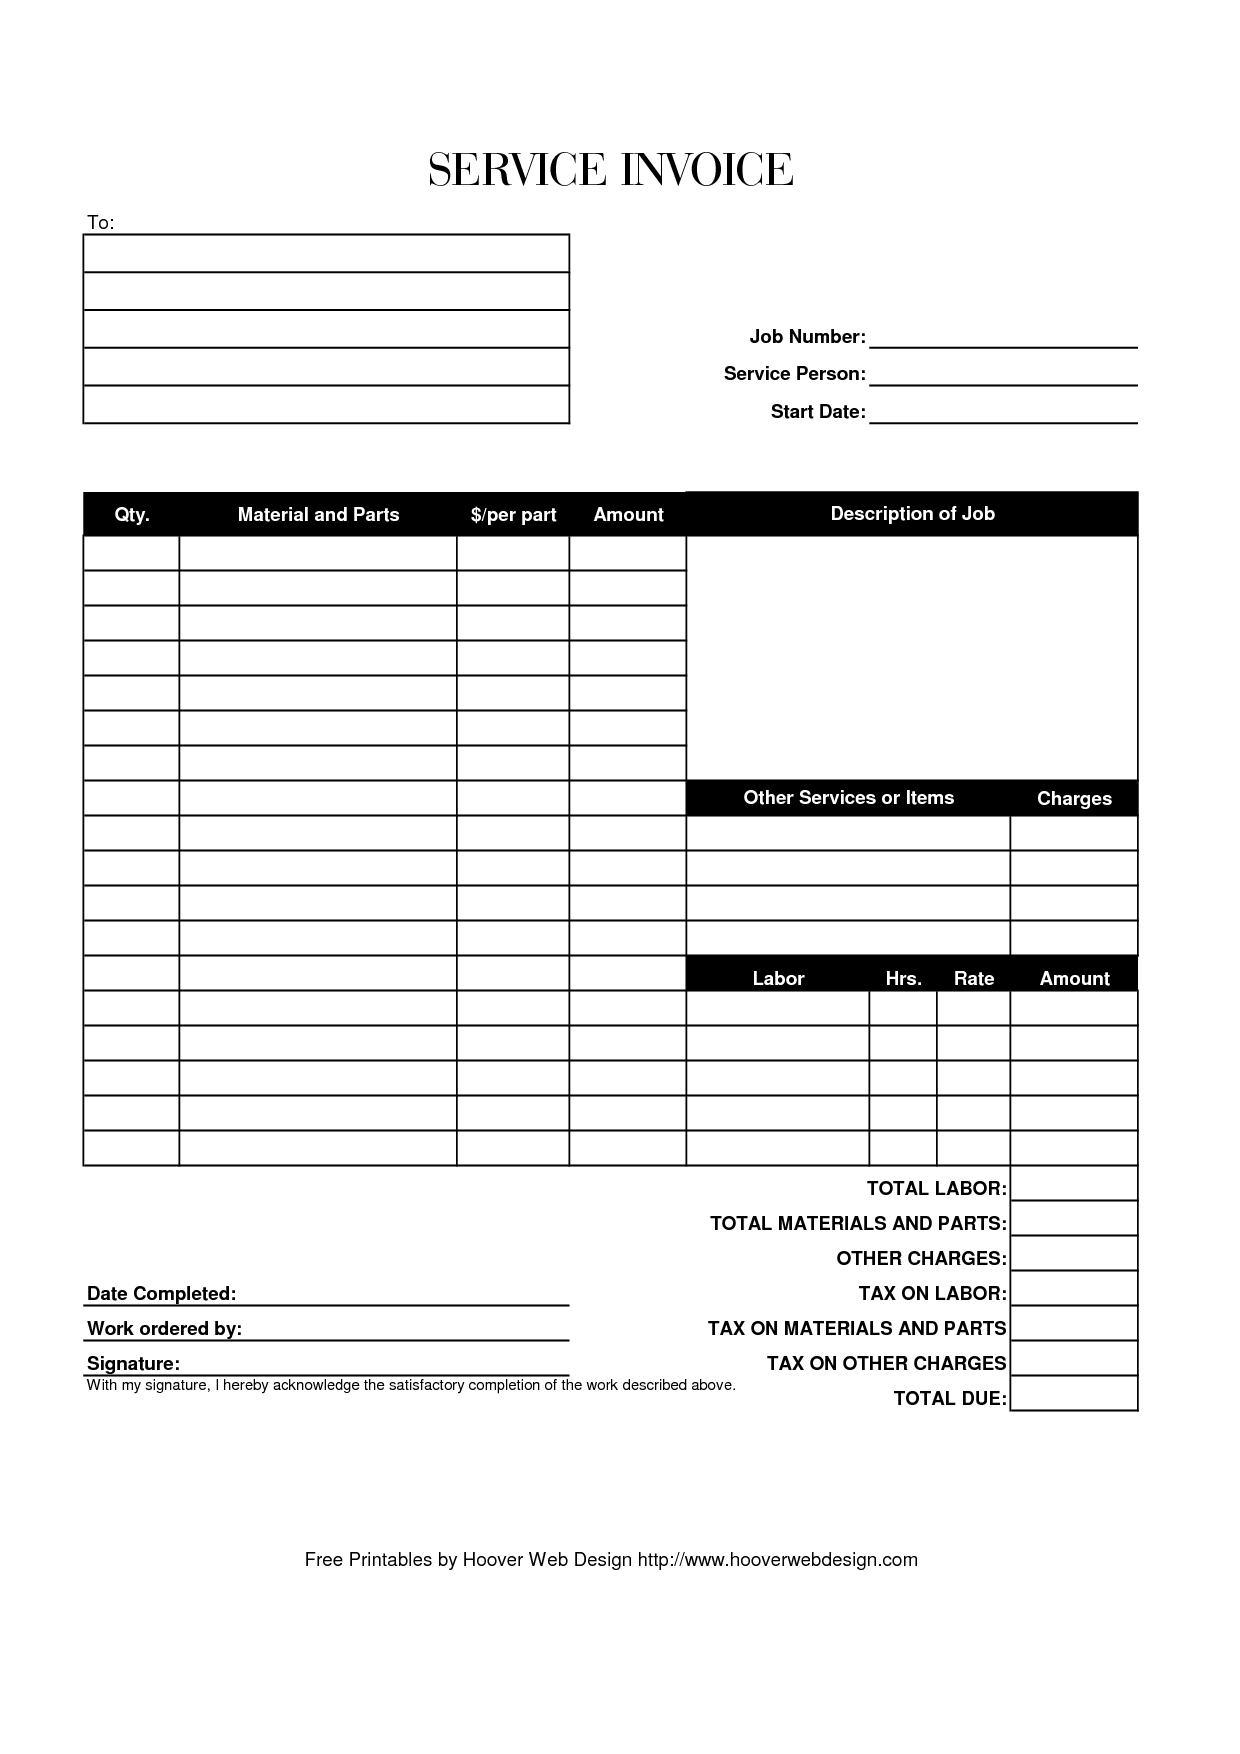 hoover receipts free printable service invoice template invoice template pdf printable